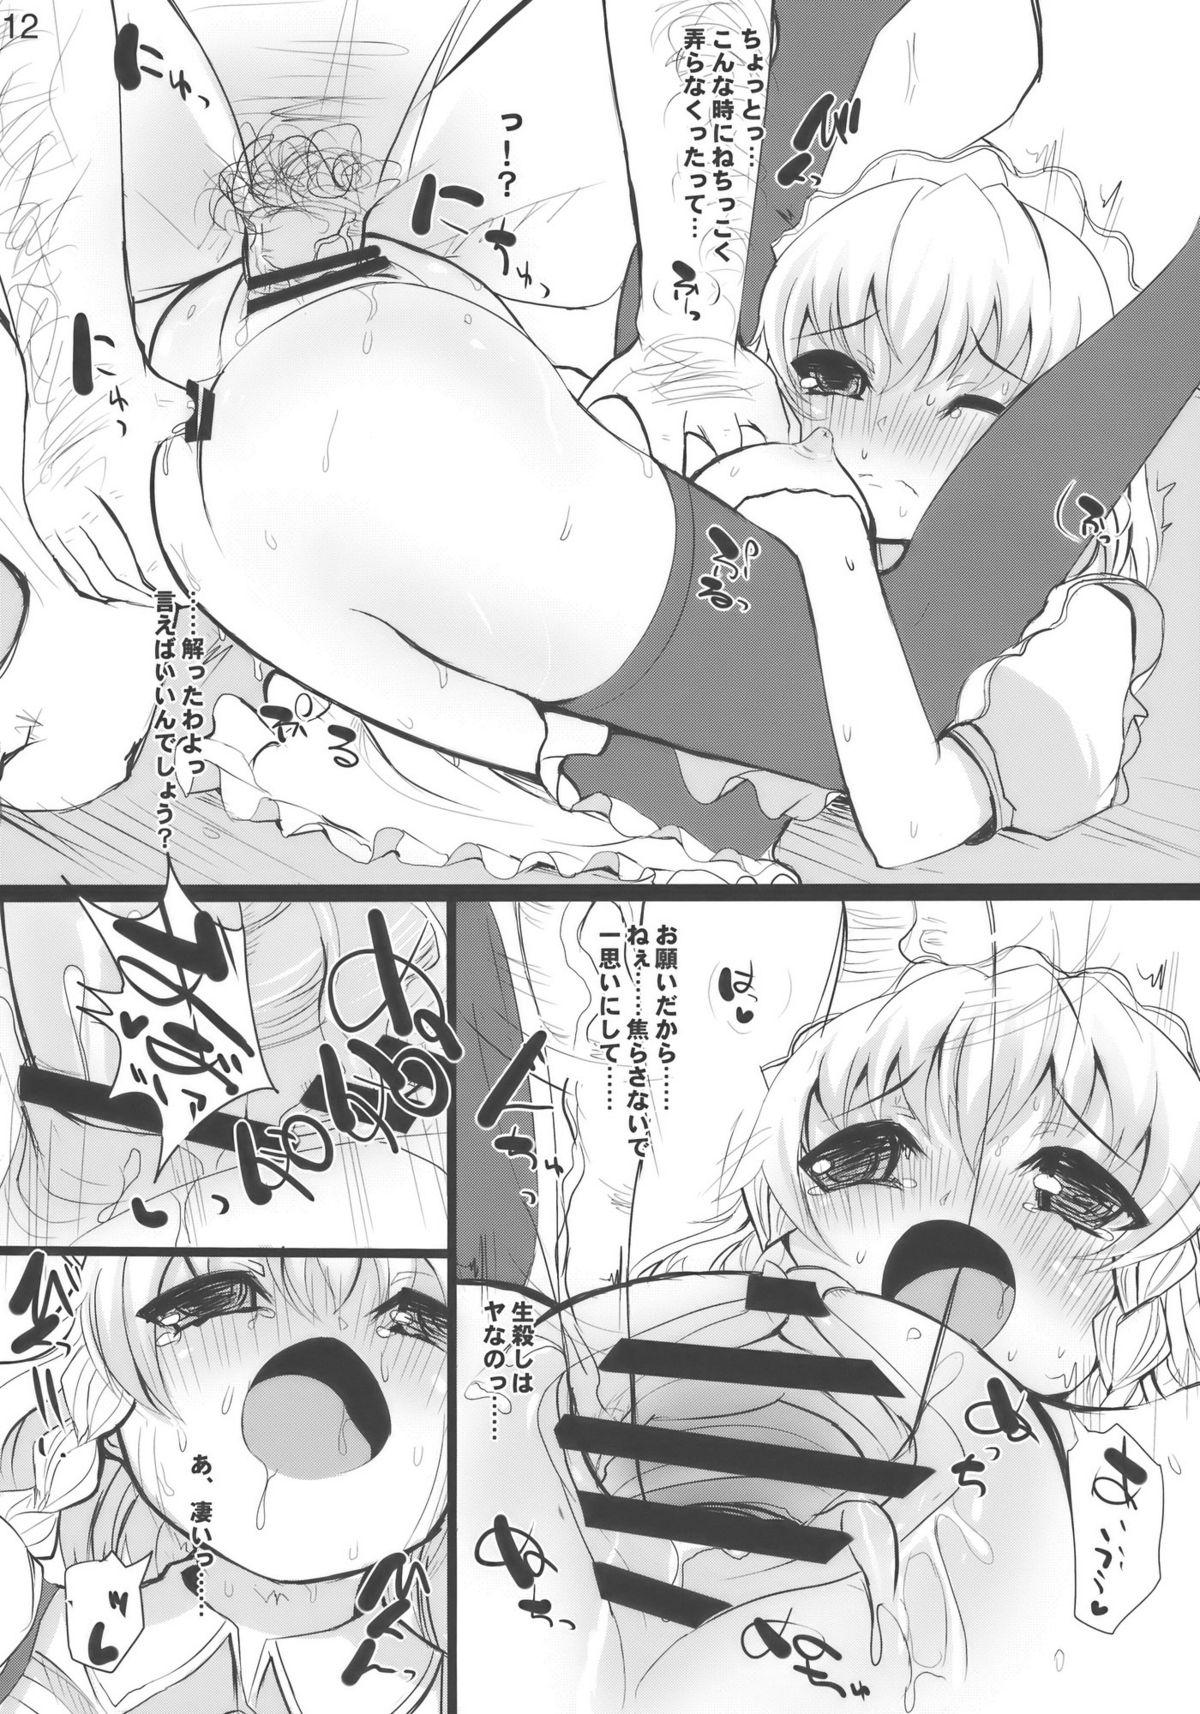 Teen Fuck Feed me with your Kiss - Touhou project De Quatro - Page 12